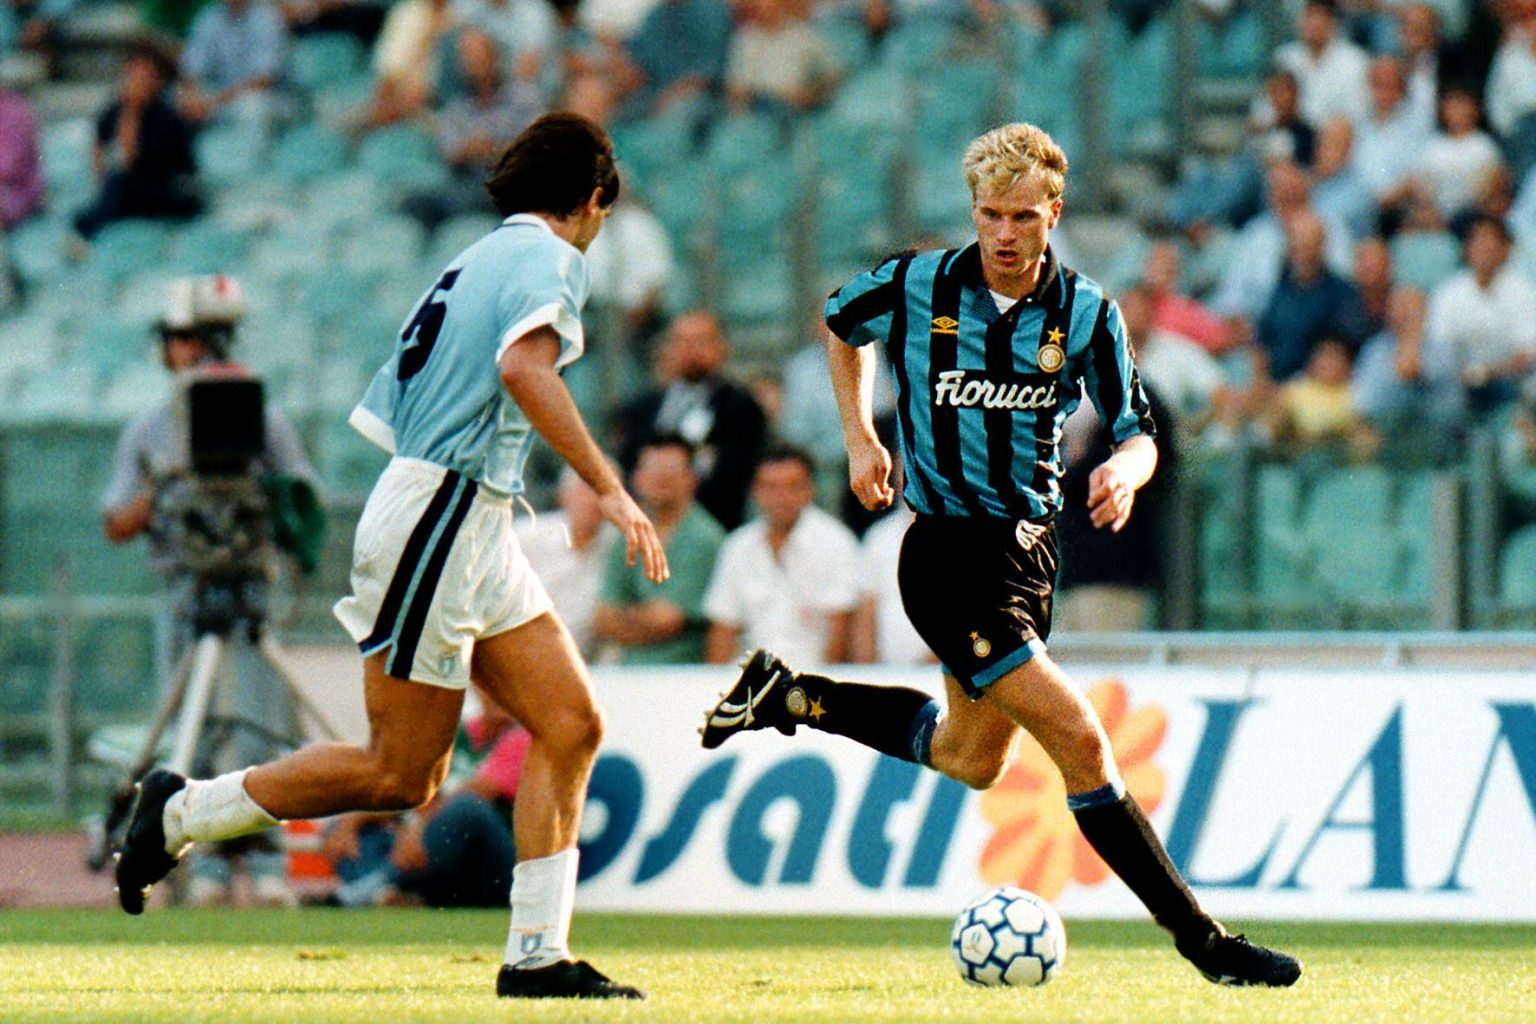  Dennis Bergkamp is playing for Inter Milan, he is running with the ball past an AS Roma player.